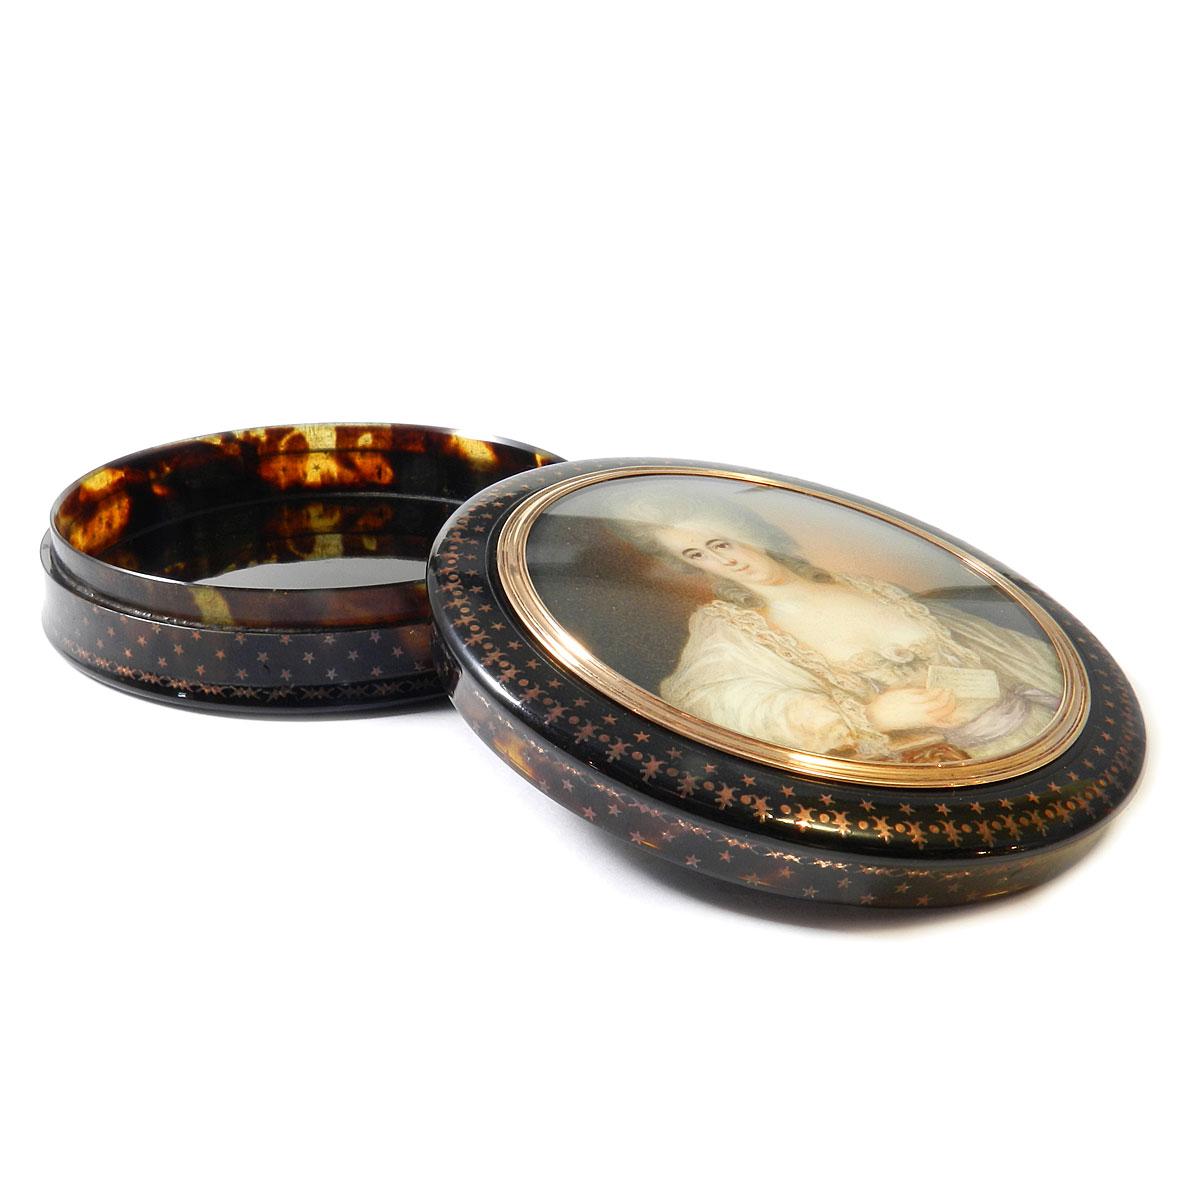 Antique French Miniature 18K Gold Piqué Tortoiseshell Snuff Box, circa 1790

Rare snuffbox made of tortoiseshell with fine gold piqué decor on all sides. On the lid, a central medallion in a 18K gold frame with the portrait of a gallant lady in a